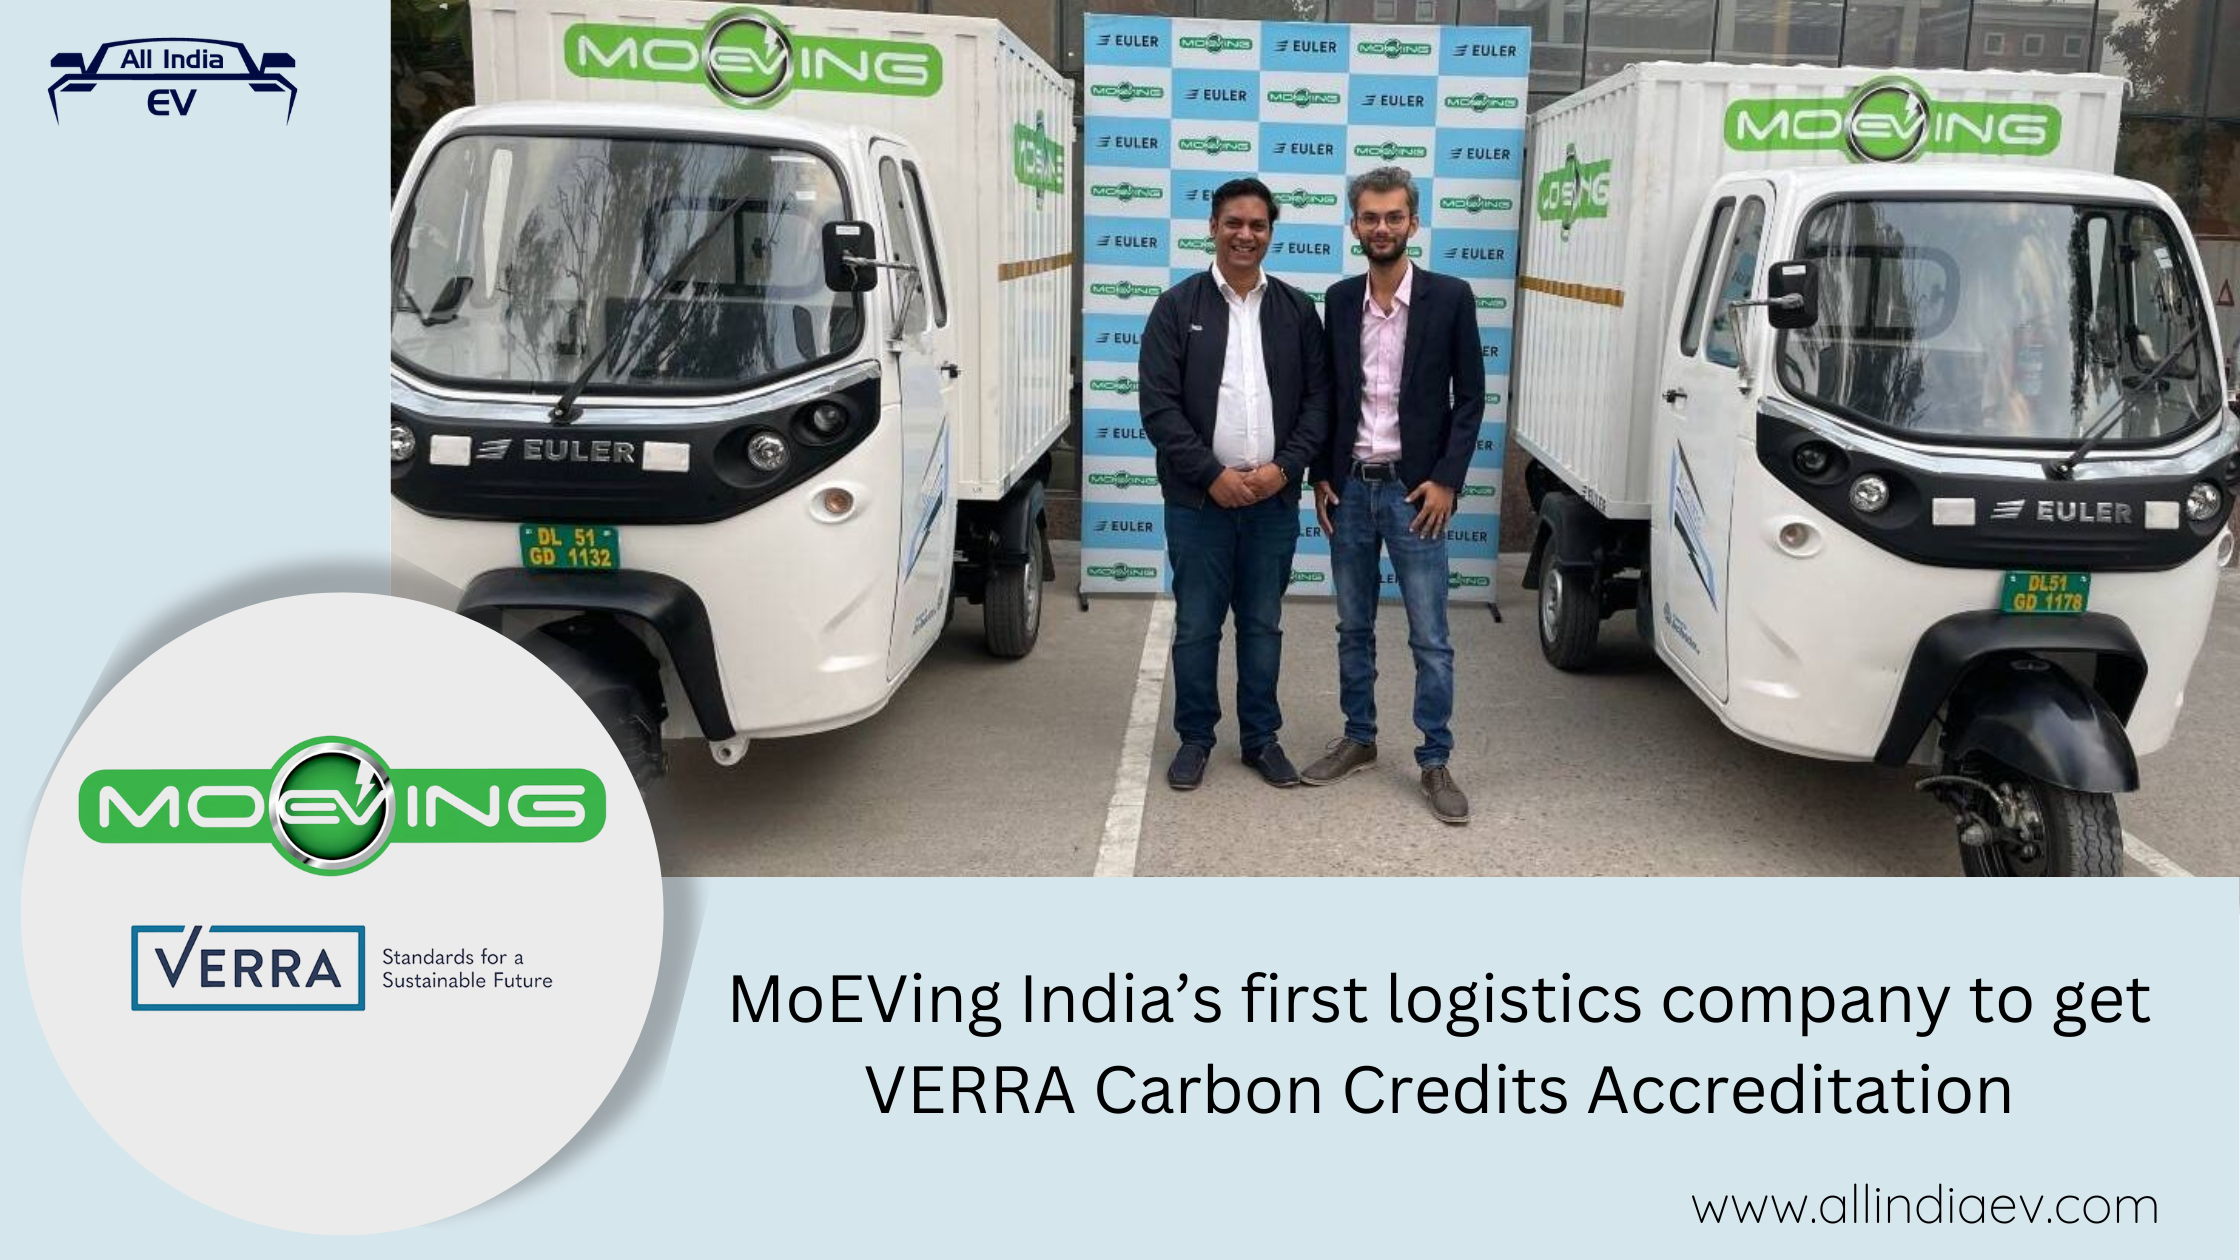 MoEVing India’s first logistics company to get VERRA Carbon Credits Accreditation